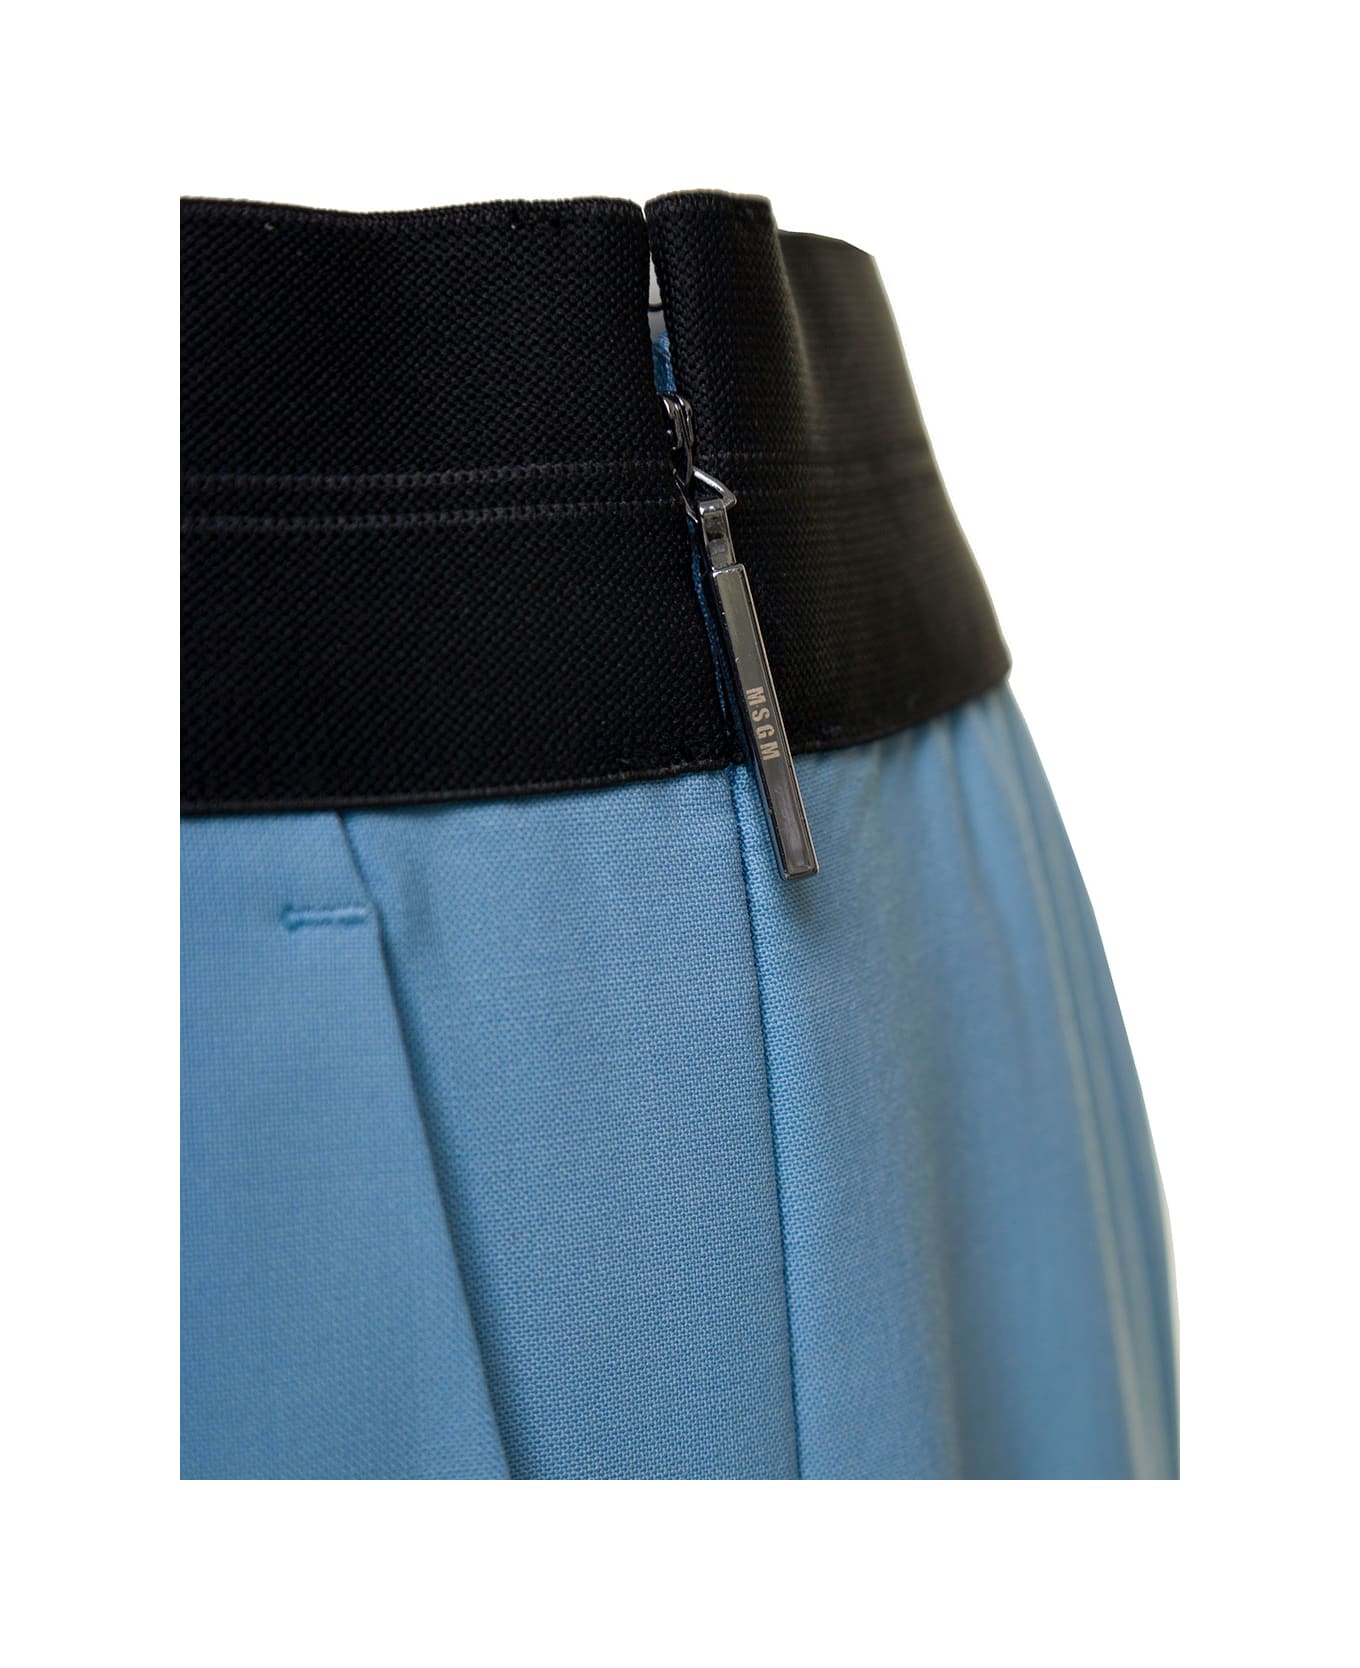 MSGM Light Blue Wide Leg Trousers With Logo Waistband In Wool Woman - Blu ボトムス